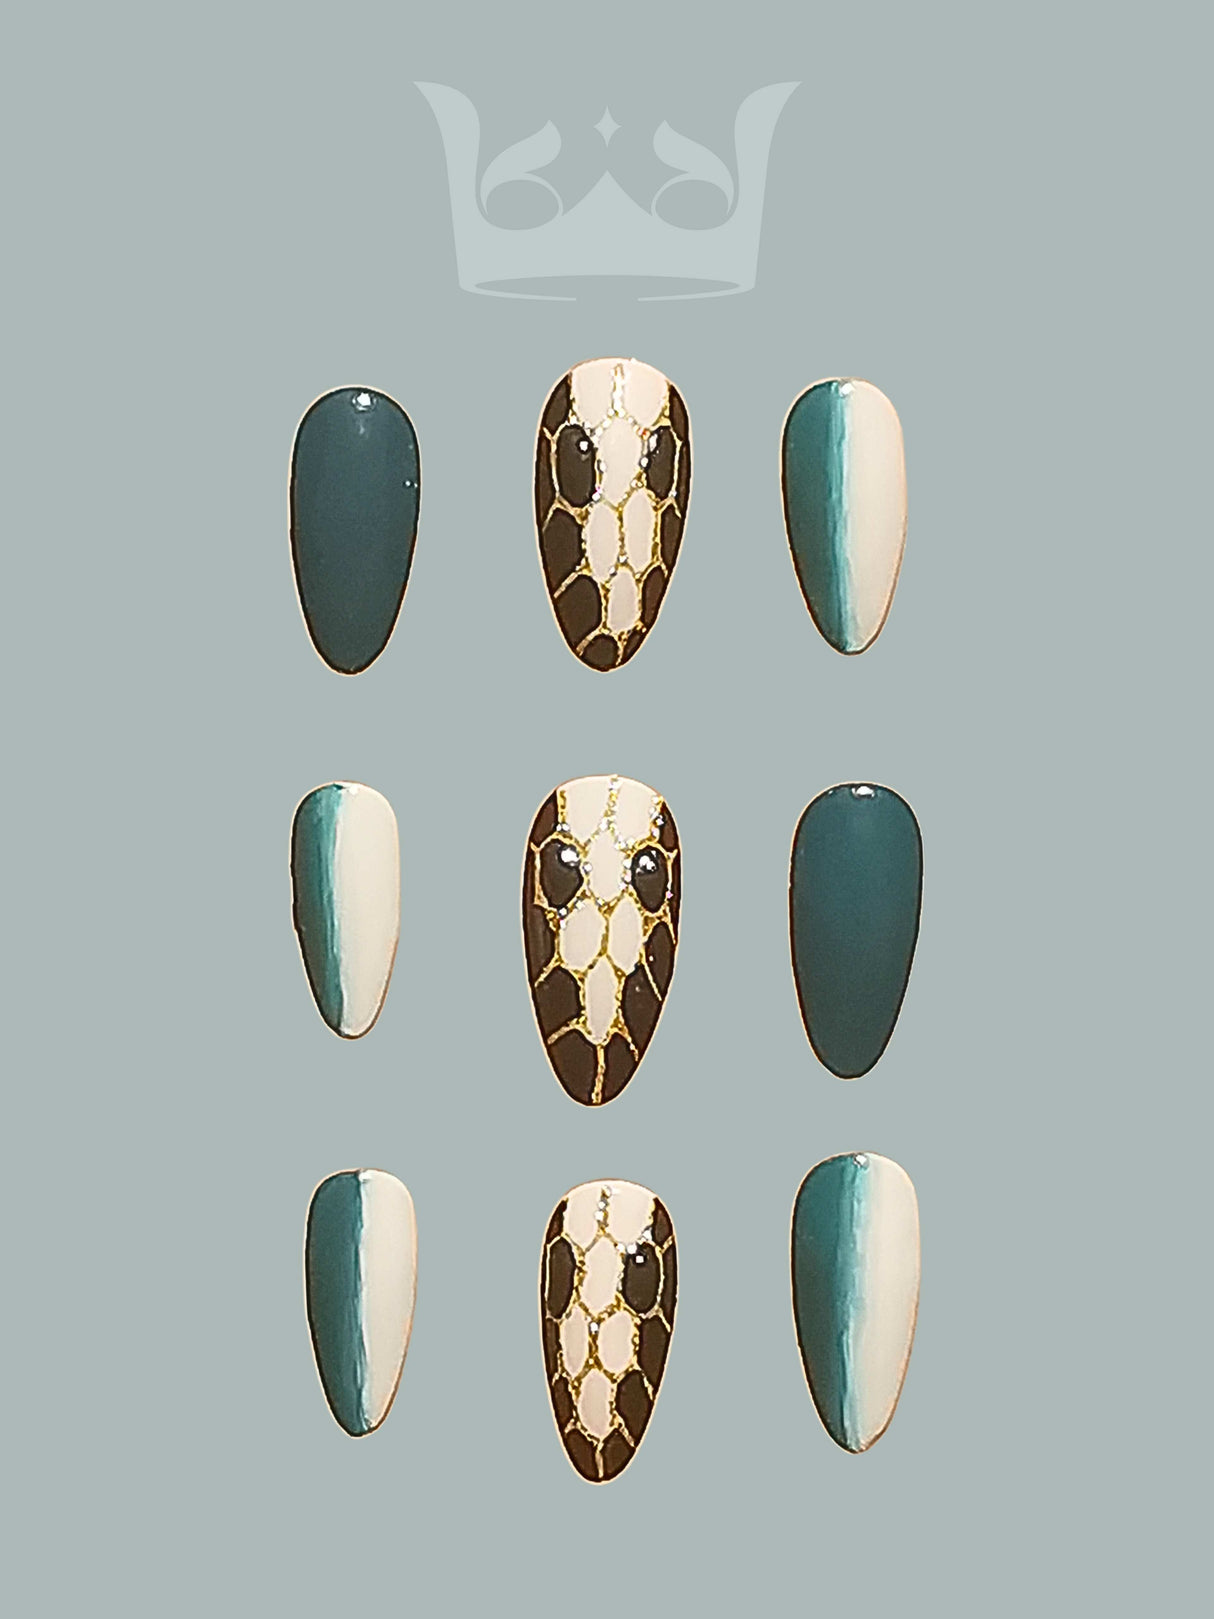 These press-on nails feature a modern and chic design with a deep teal and neutral beige color scheme, almond shape, and symmetrical arrangement for a stylish fashion statement.